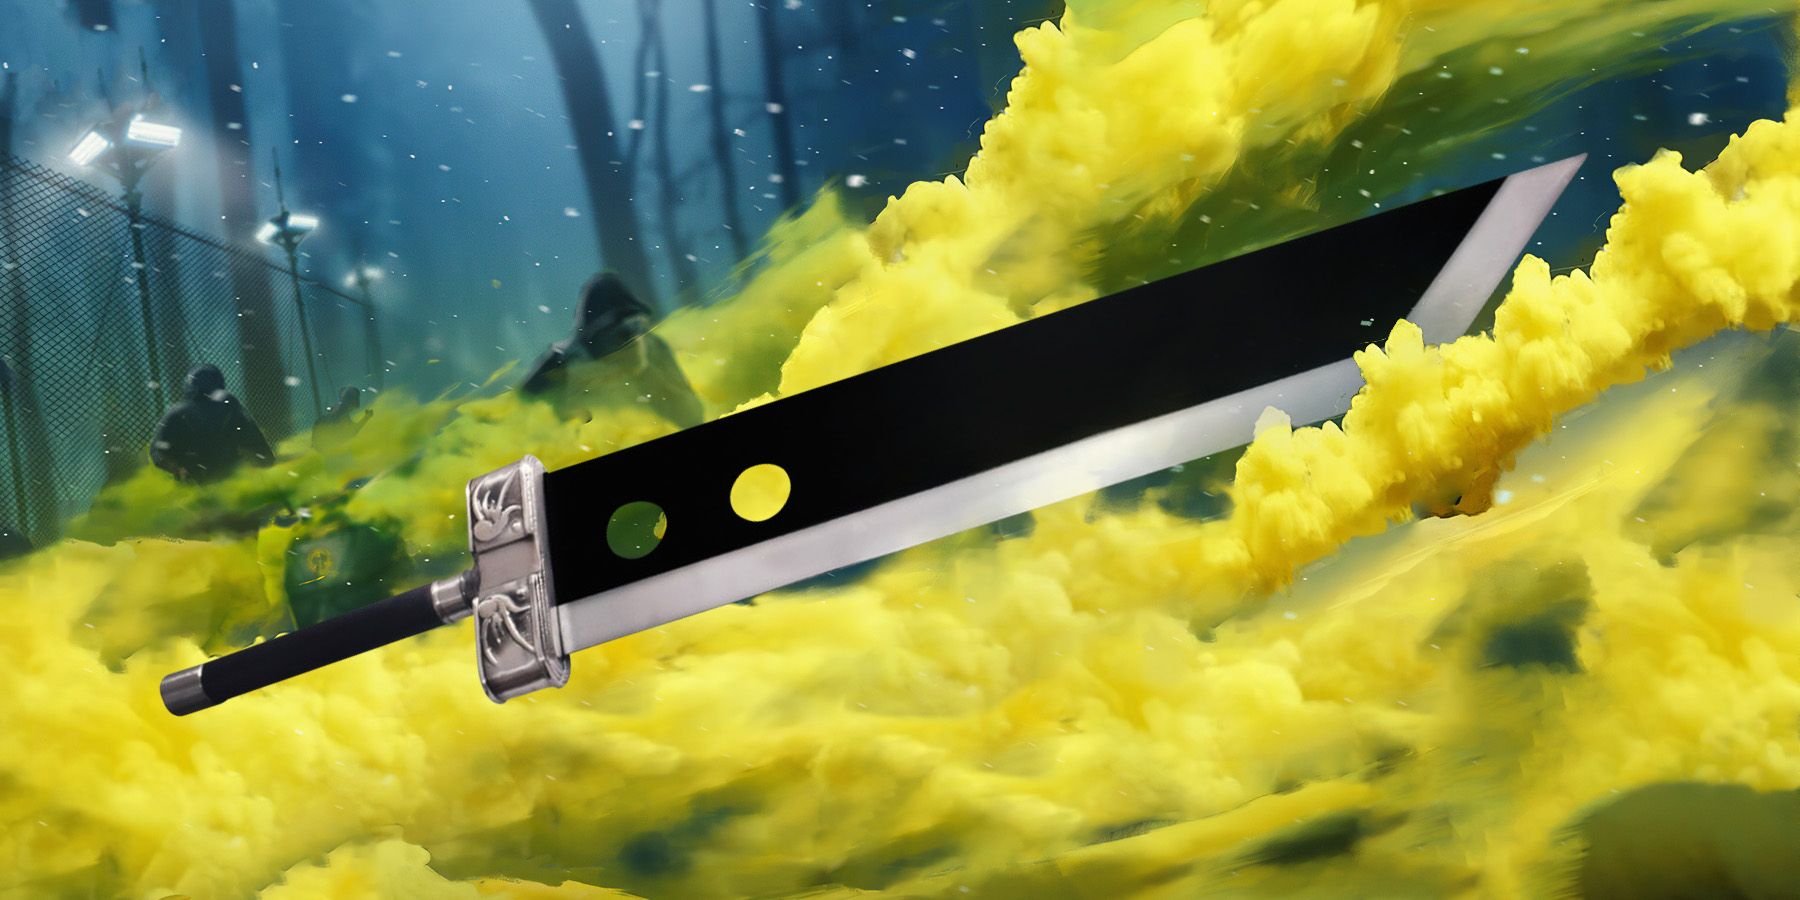 There are two versions of the Buster Sword being introduced to Apex Legends during the Final Fantasy VII Rebirth crossover event.